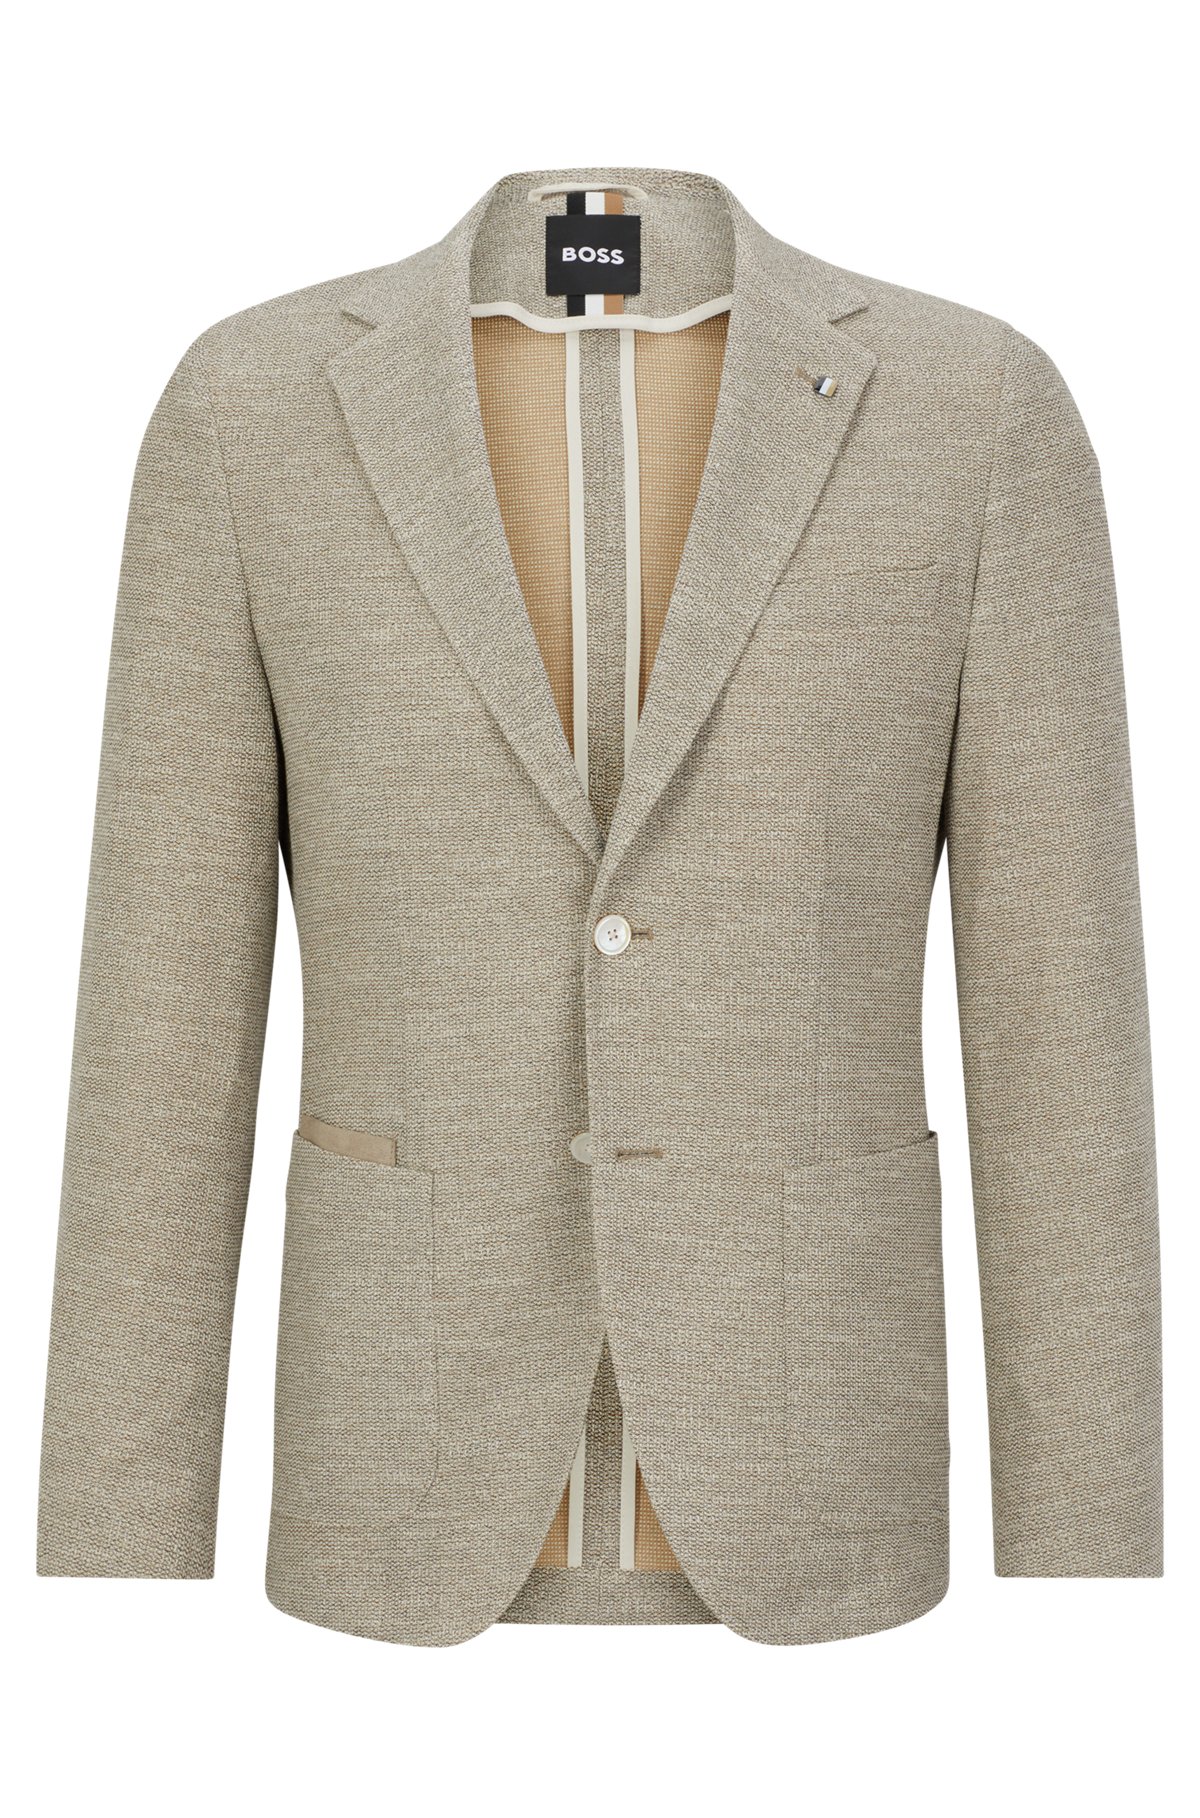 Regular-fit jacket in micro-patterned cloth, Light Beige